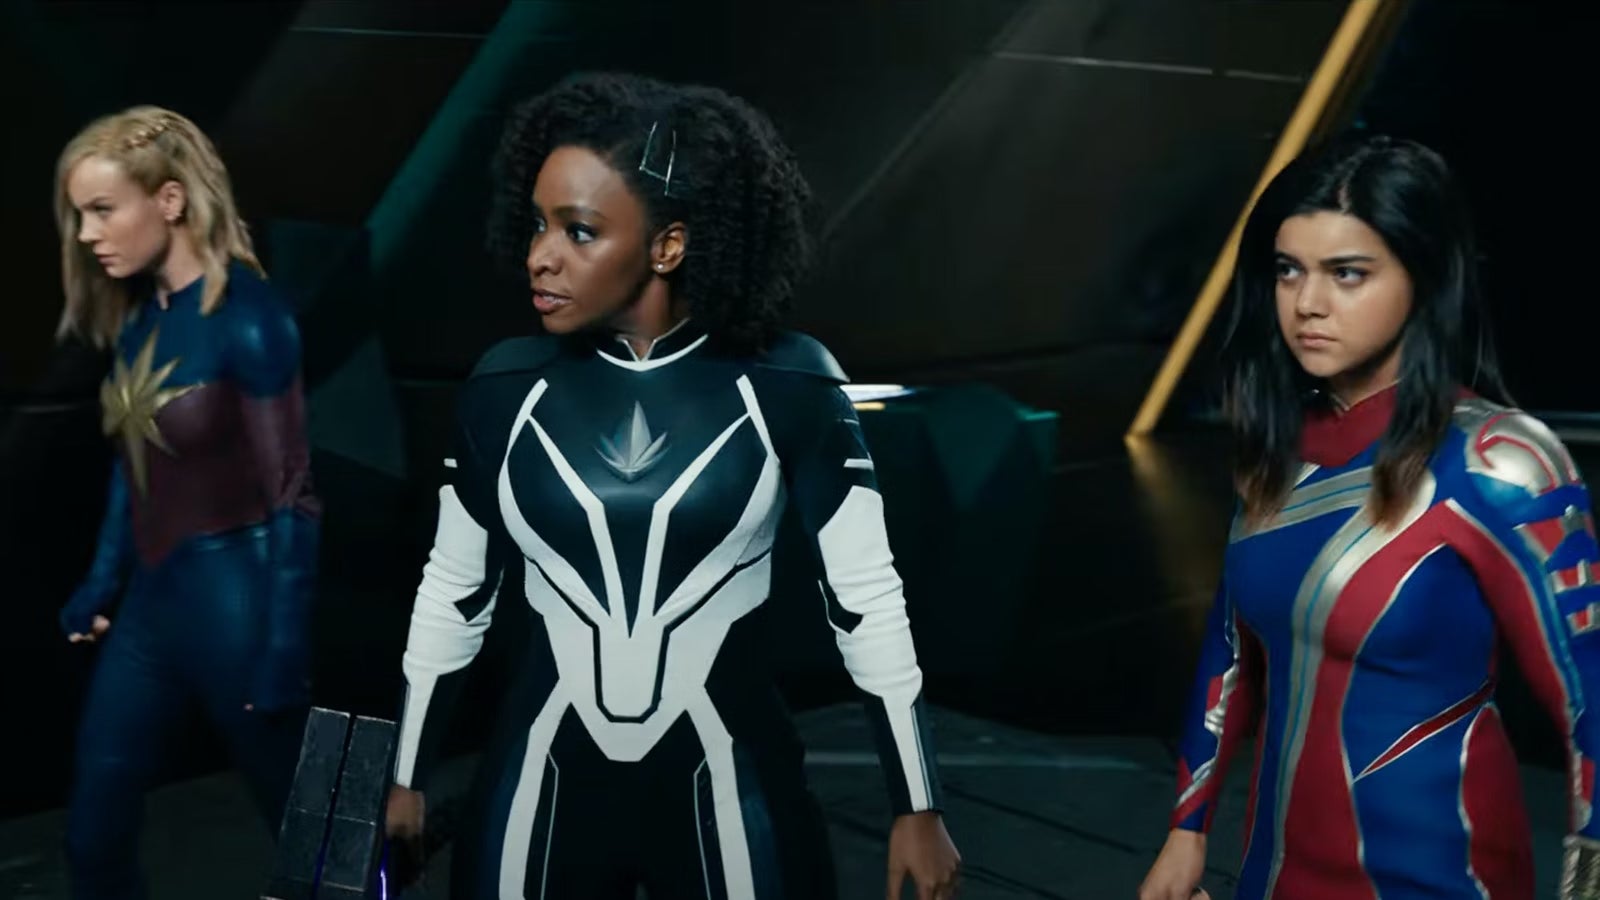 Brie Larson, Teyonah Parris, and Iman Vellani in \'The Marvels\'.